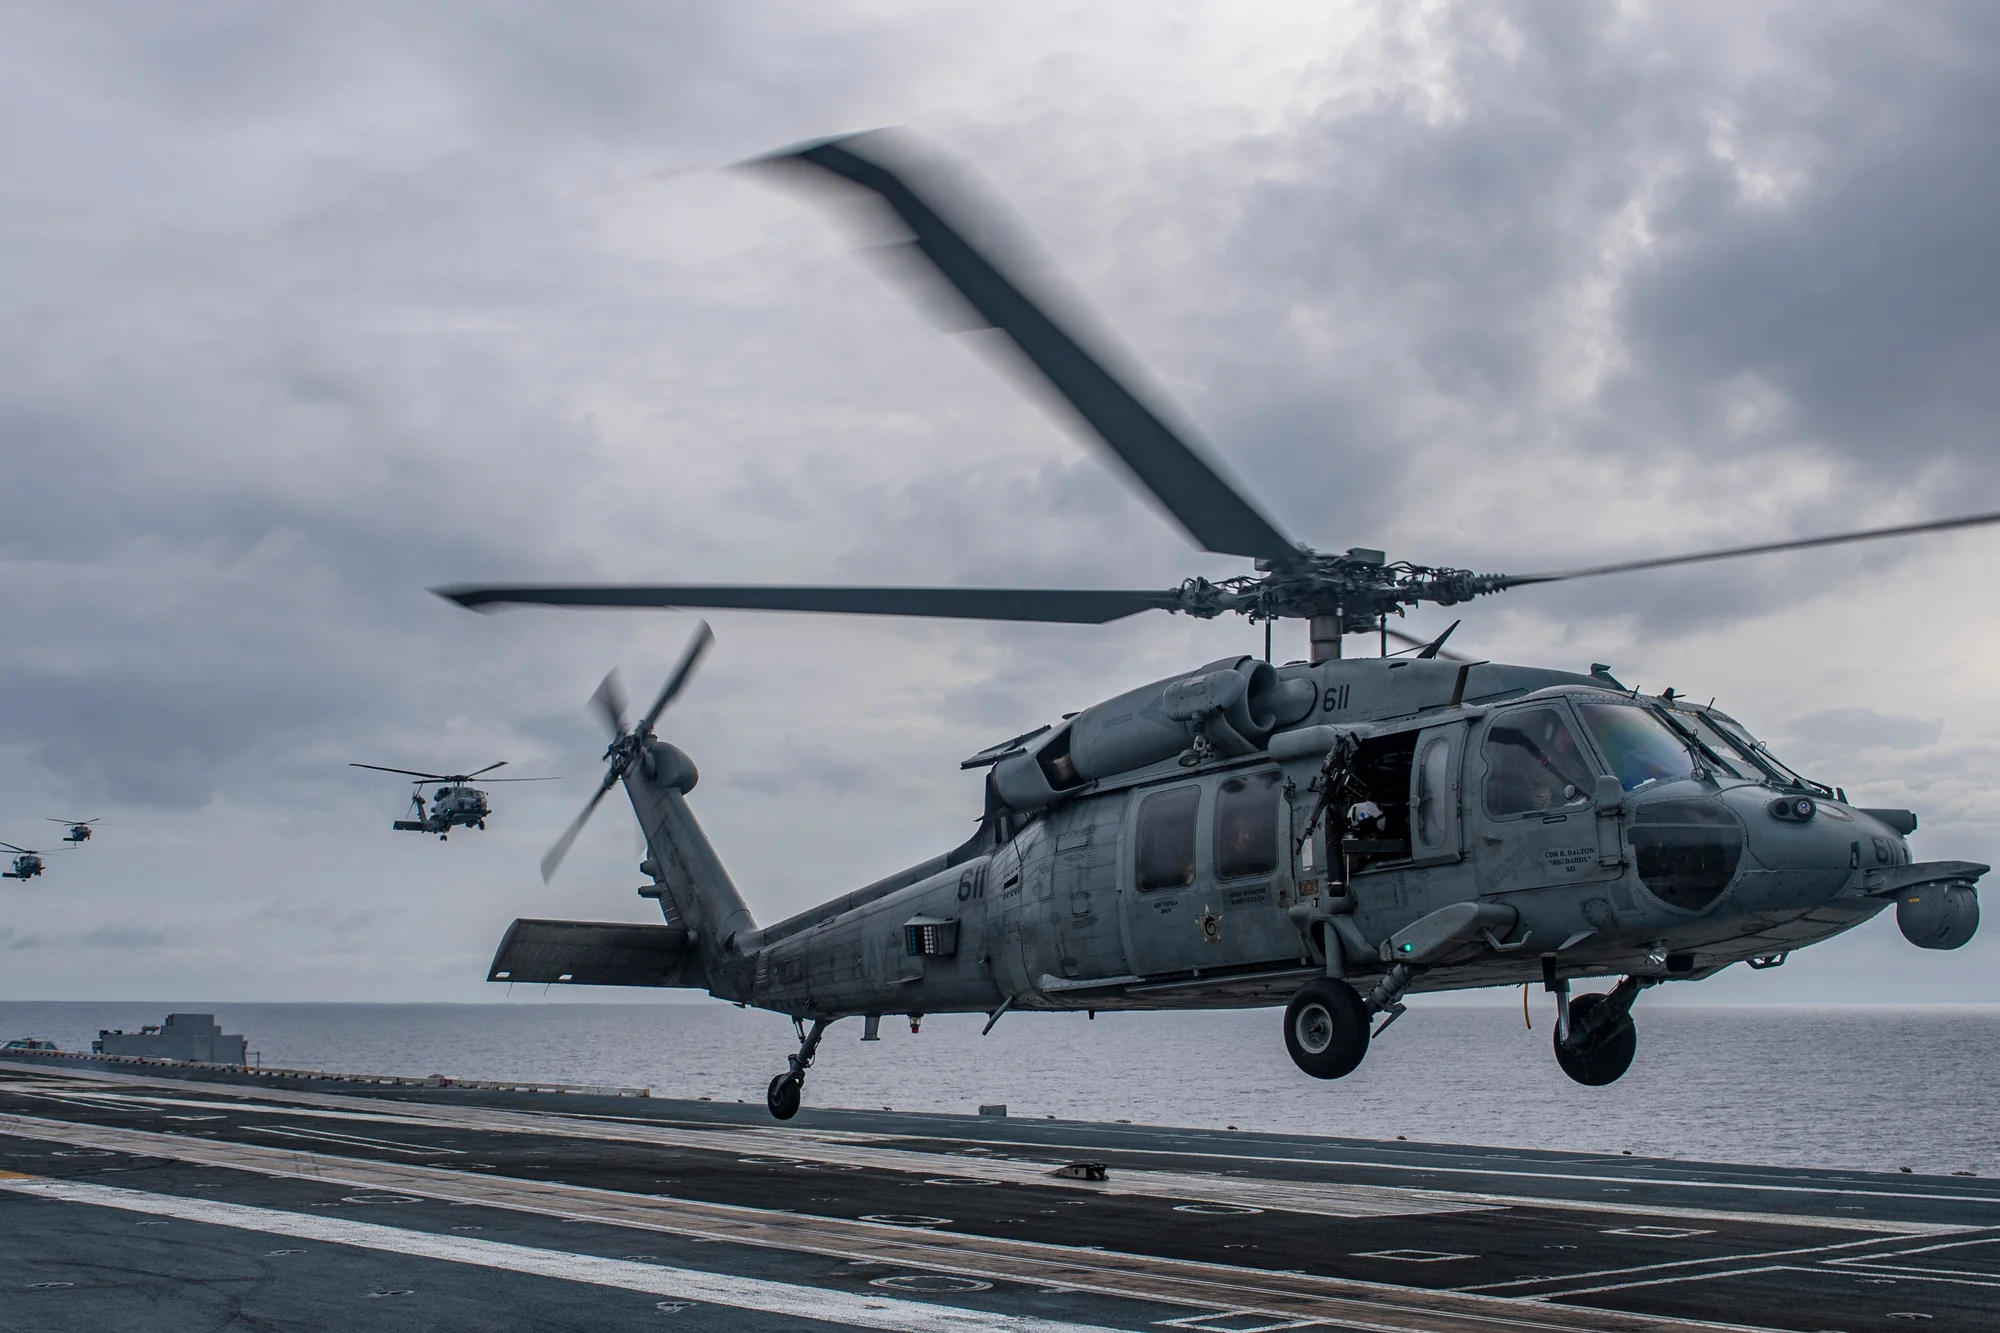 An MH-60S Sea Hawk helicopter lands aboard the aircraft carrier USS Nimitz in the South China Sea, Sunday, Feb. 12, 2023, as Nimitz in U.S. 7th Fleet was conducting operations. The 7th Fleet based in Japan said Sunday that the USS Nimitz aircraft carrier strike group and the 13th Marine Expeditionary Unit have been conducting “integrated expeditionary strike force operations” in the South China Sea. US Navy photo by Mass Communication Specialist 2nd Class Justin McTaggart via A.